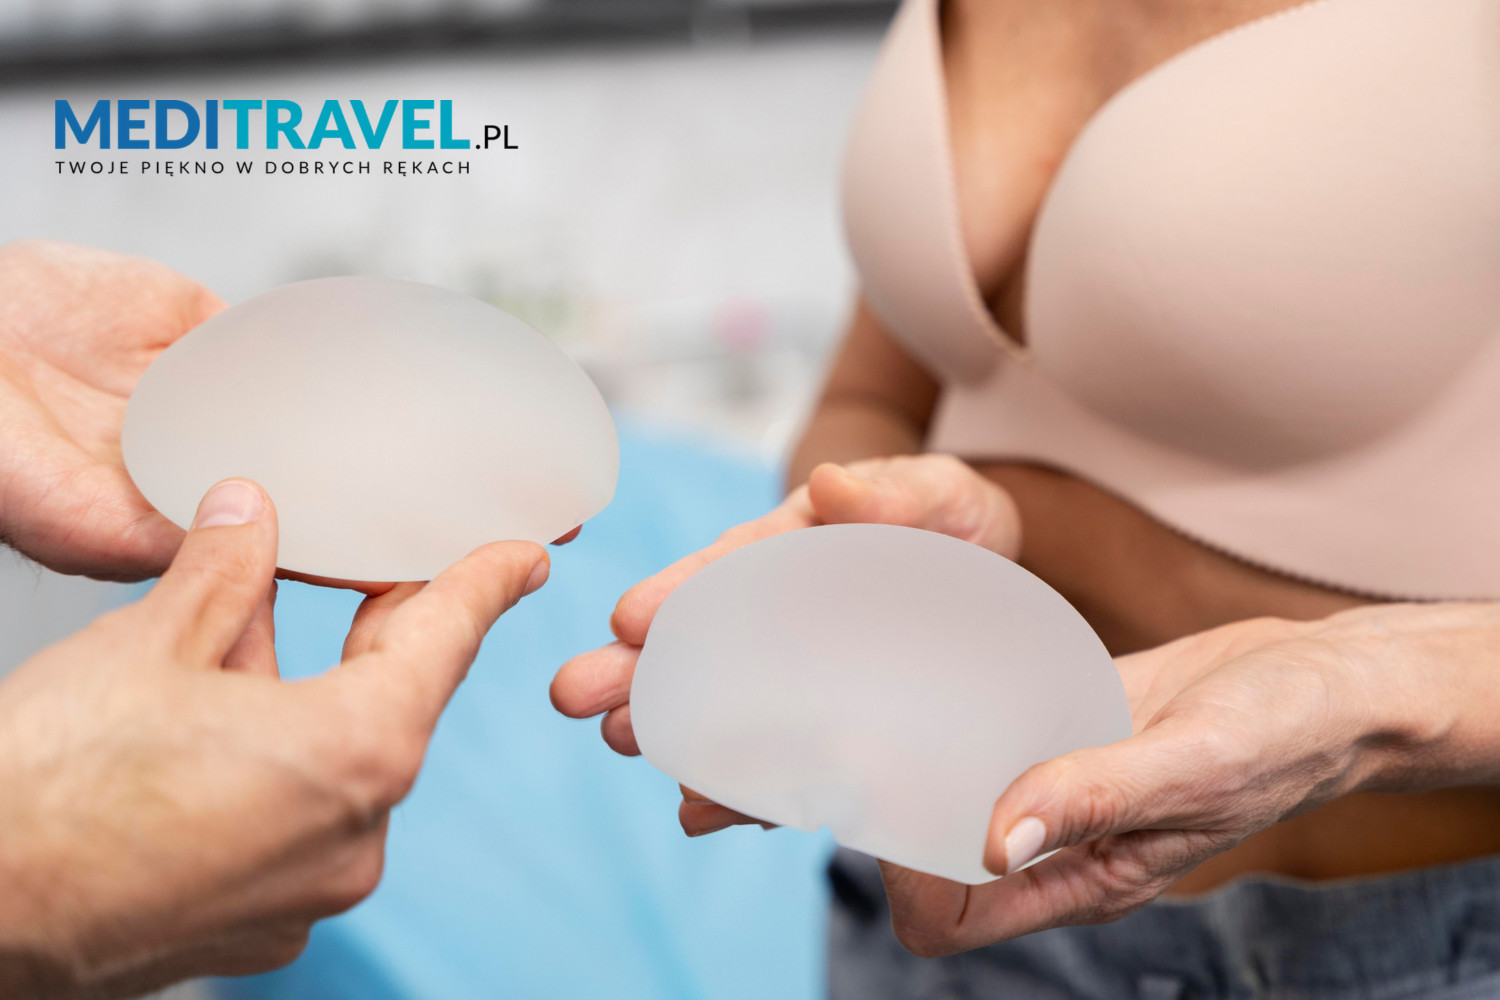 Do you need to change your breast implants?